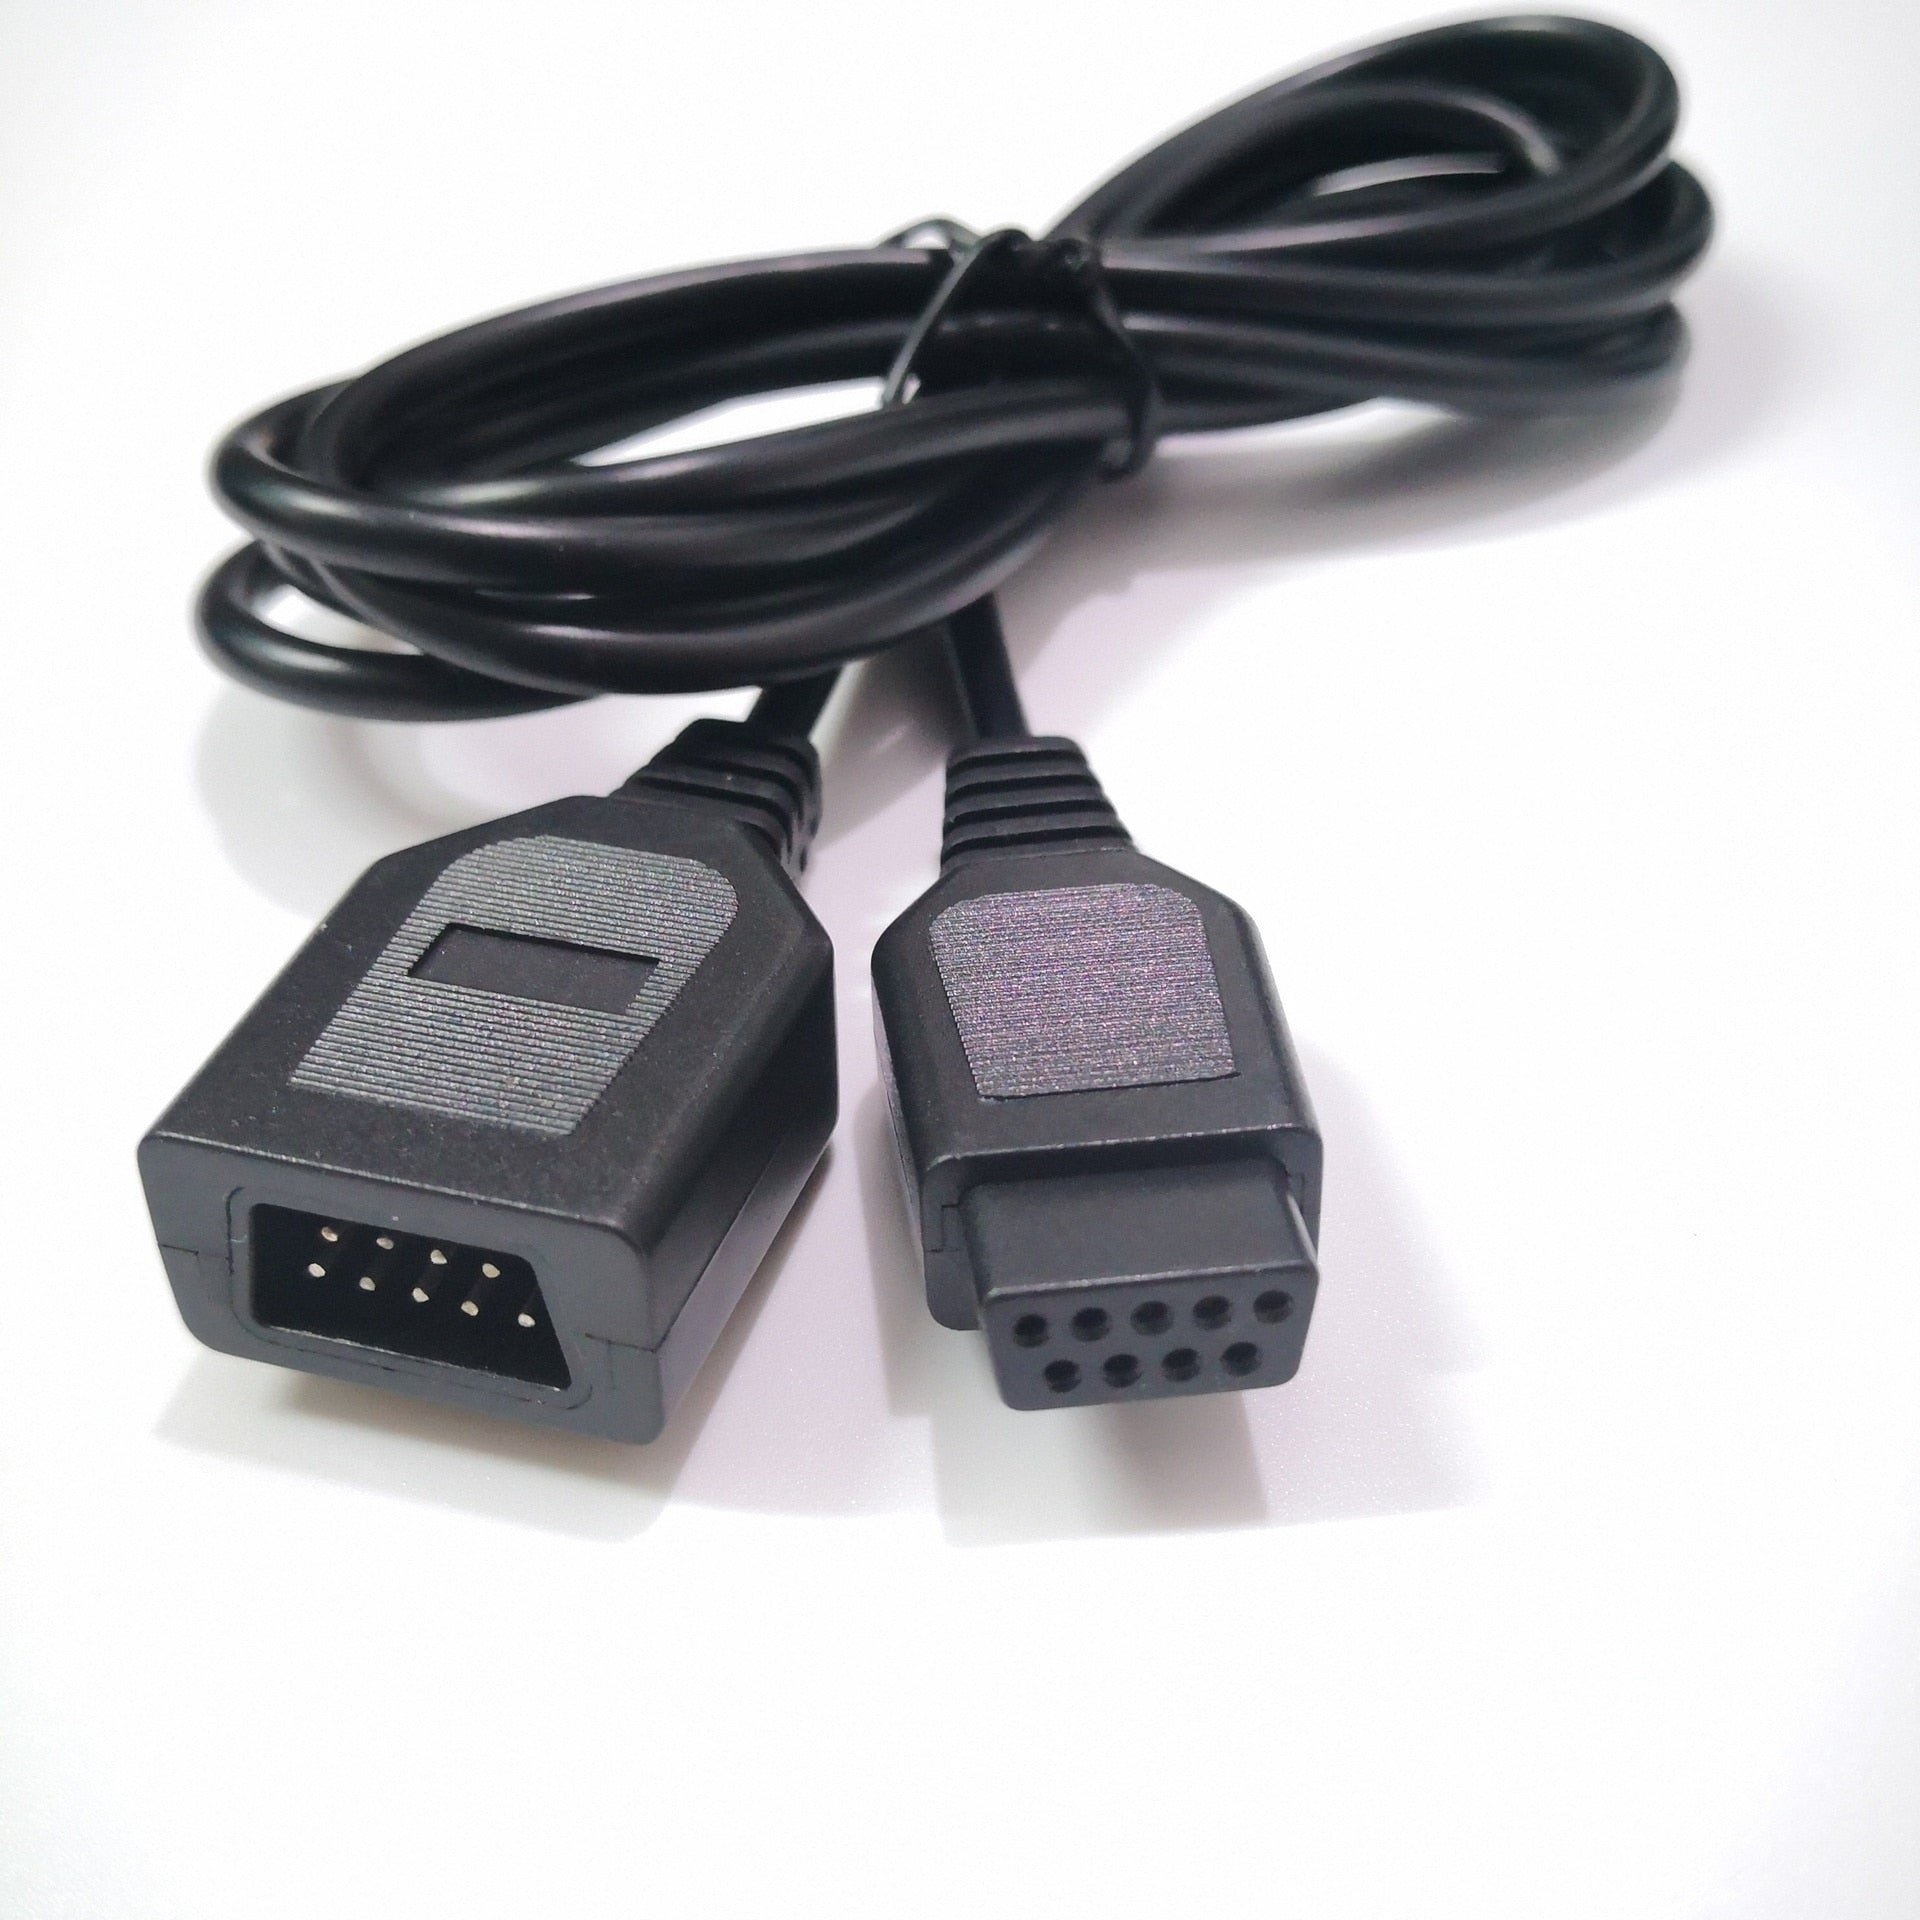 6 Foot Extension Cable for SEGA Genesis Controller Hand Held Legend